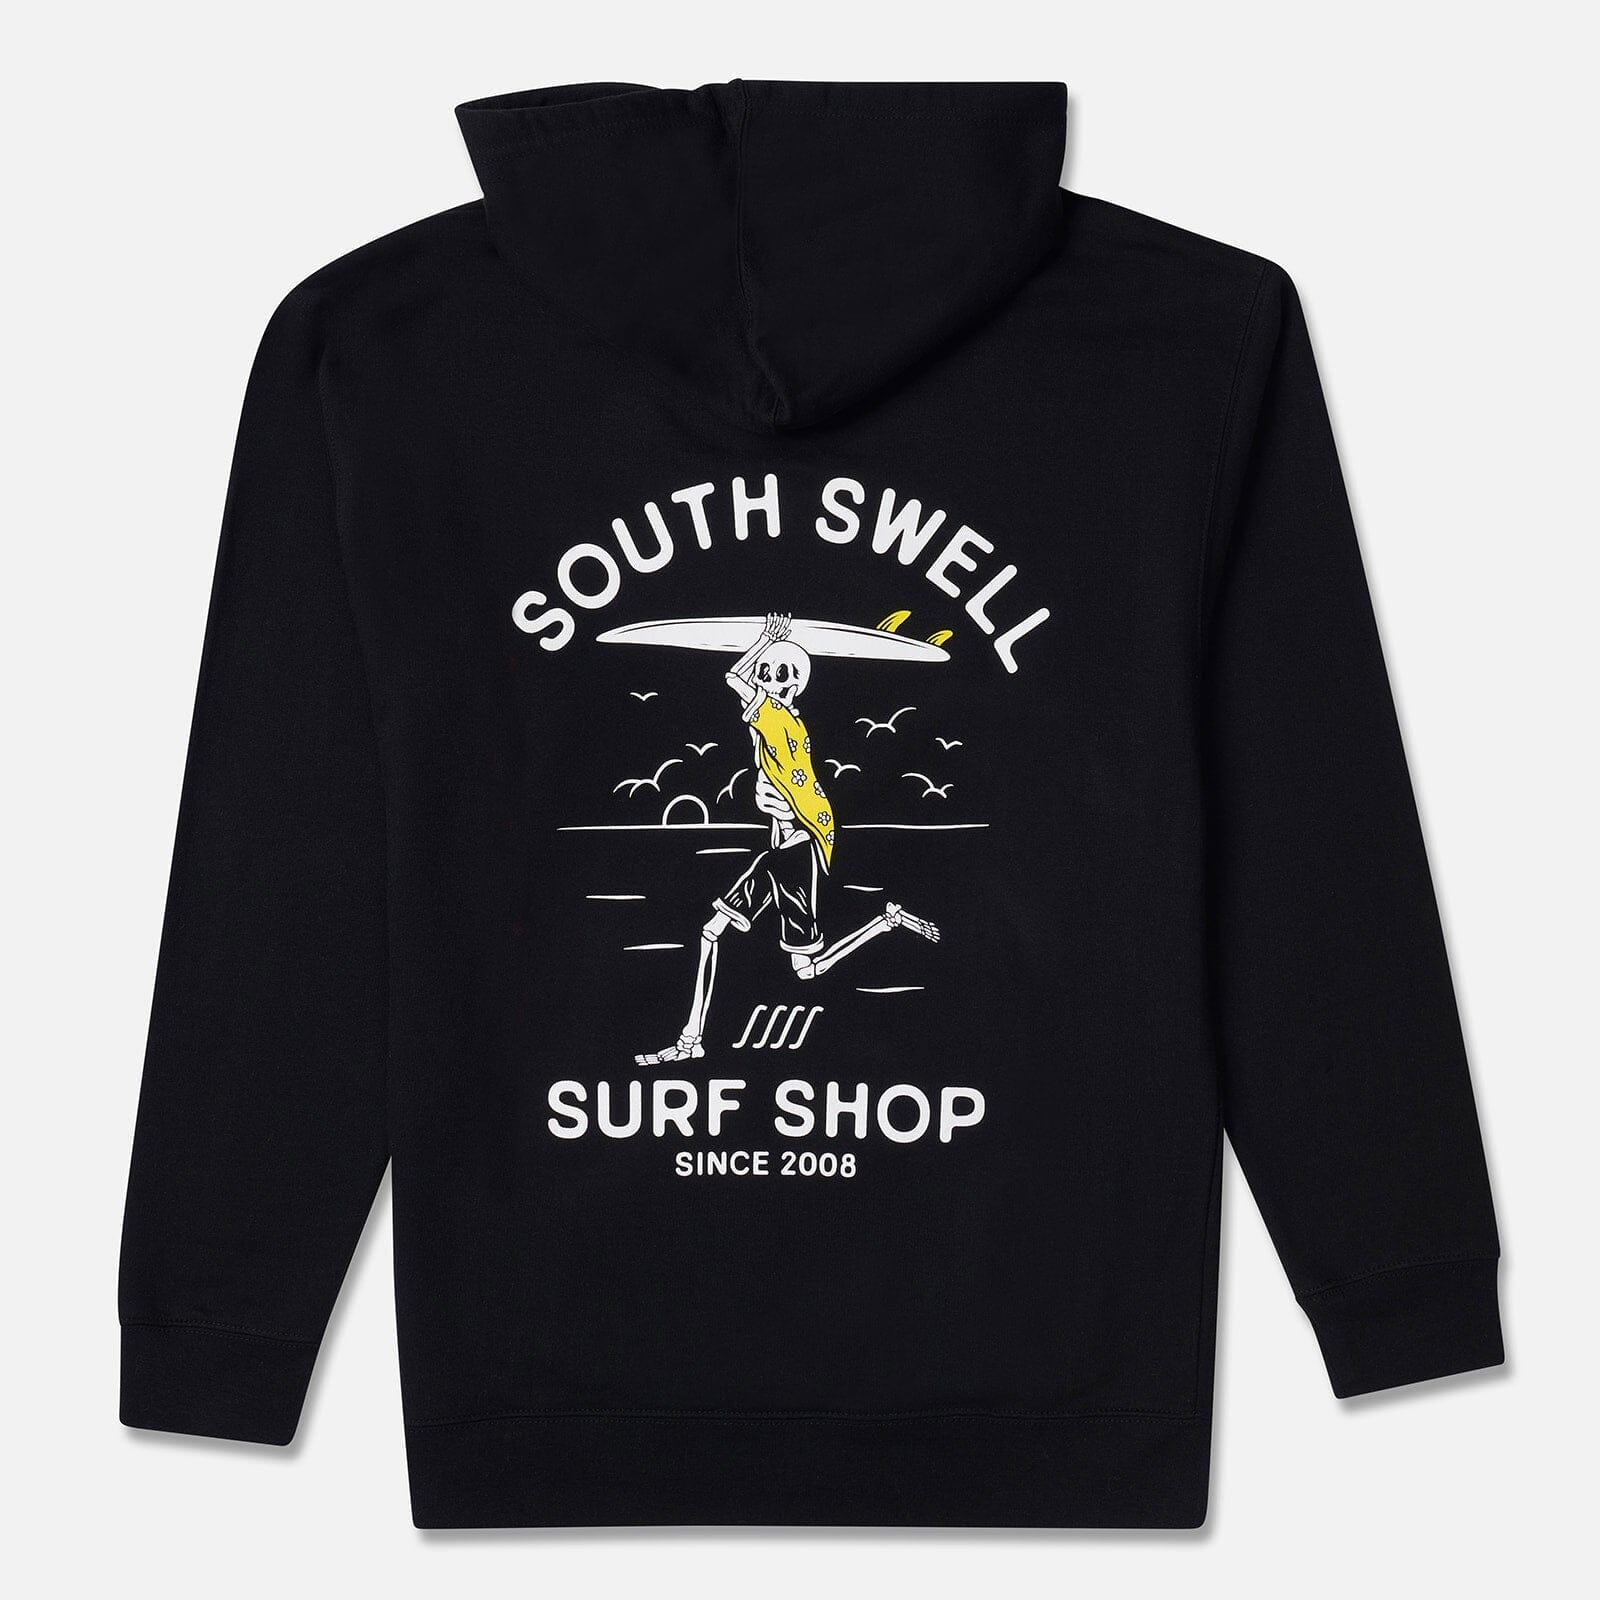 South Swell Shred Til Dead Youth Hoodie M Sweatshirts & Hoodies SOUTH SWELL 